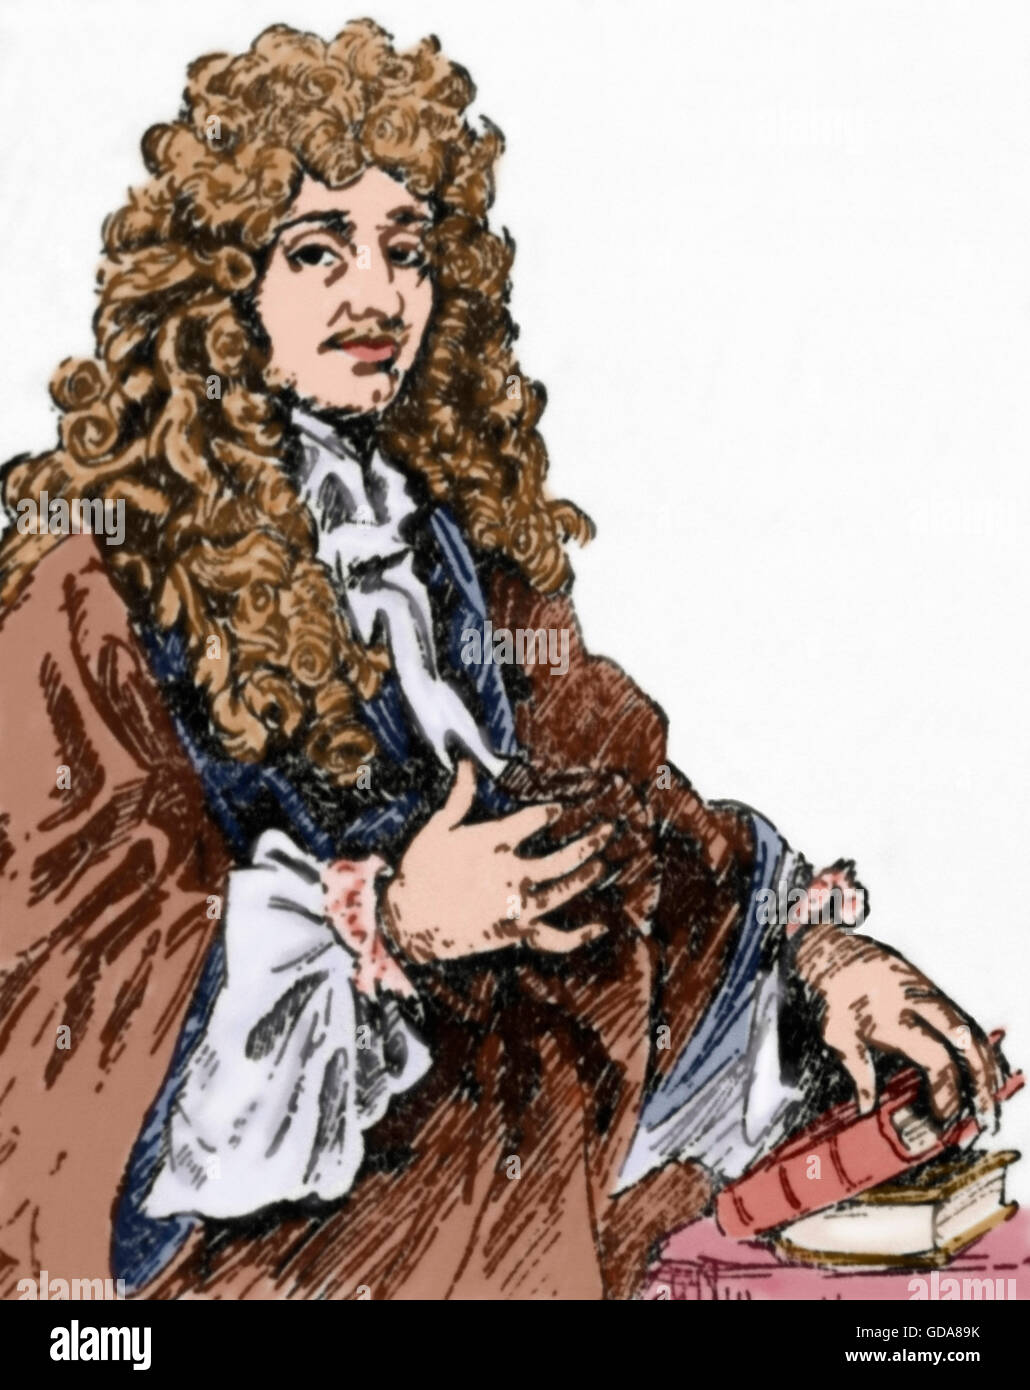 Christiaan Huygens (1629-1695). Dutch mathematician and scientist. He is known particularly as an astronomer, physicist, probabilist and horologist. Portrait. Engraving. Colored. Stock Photo